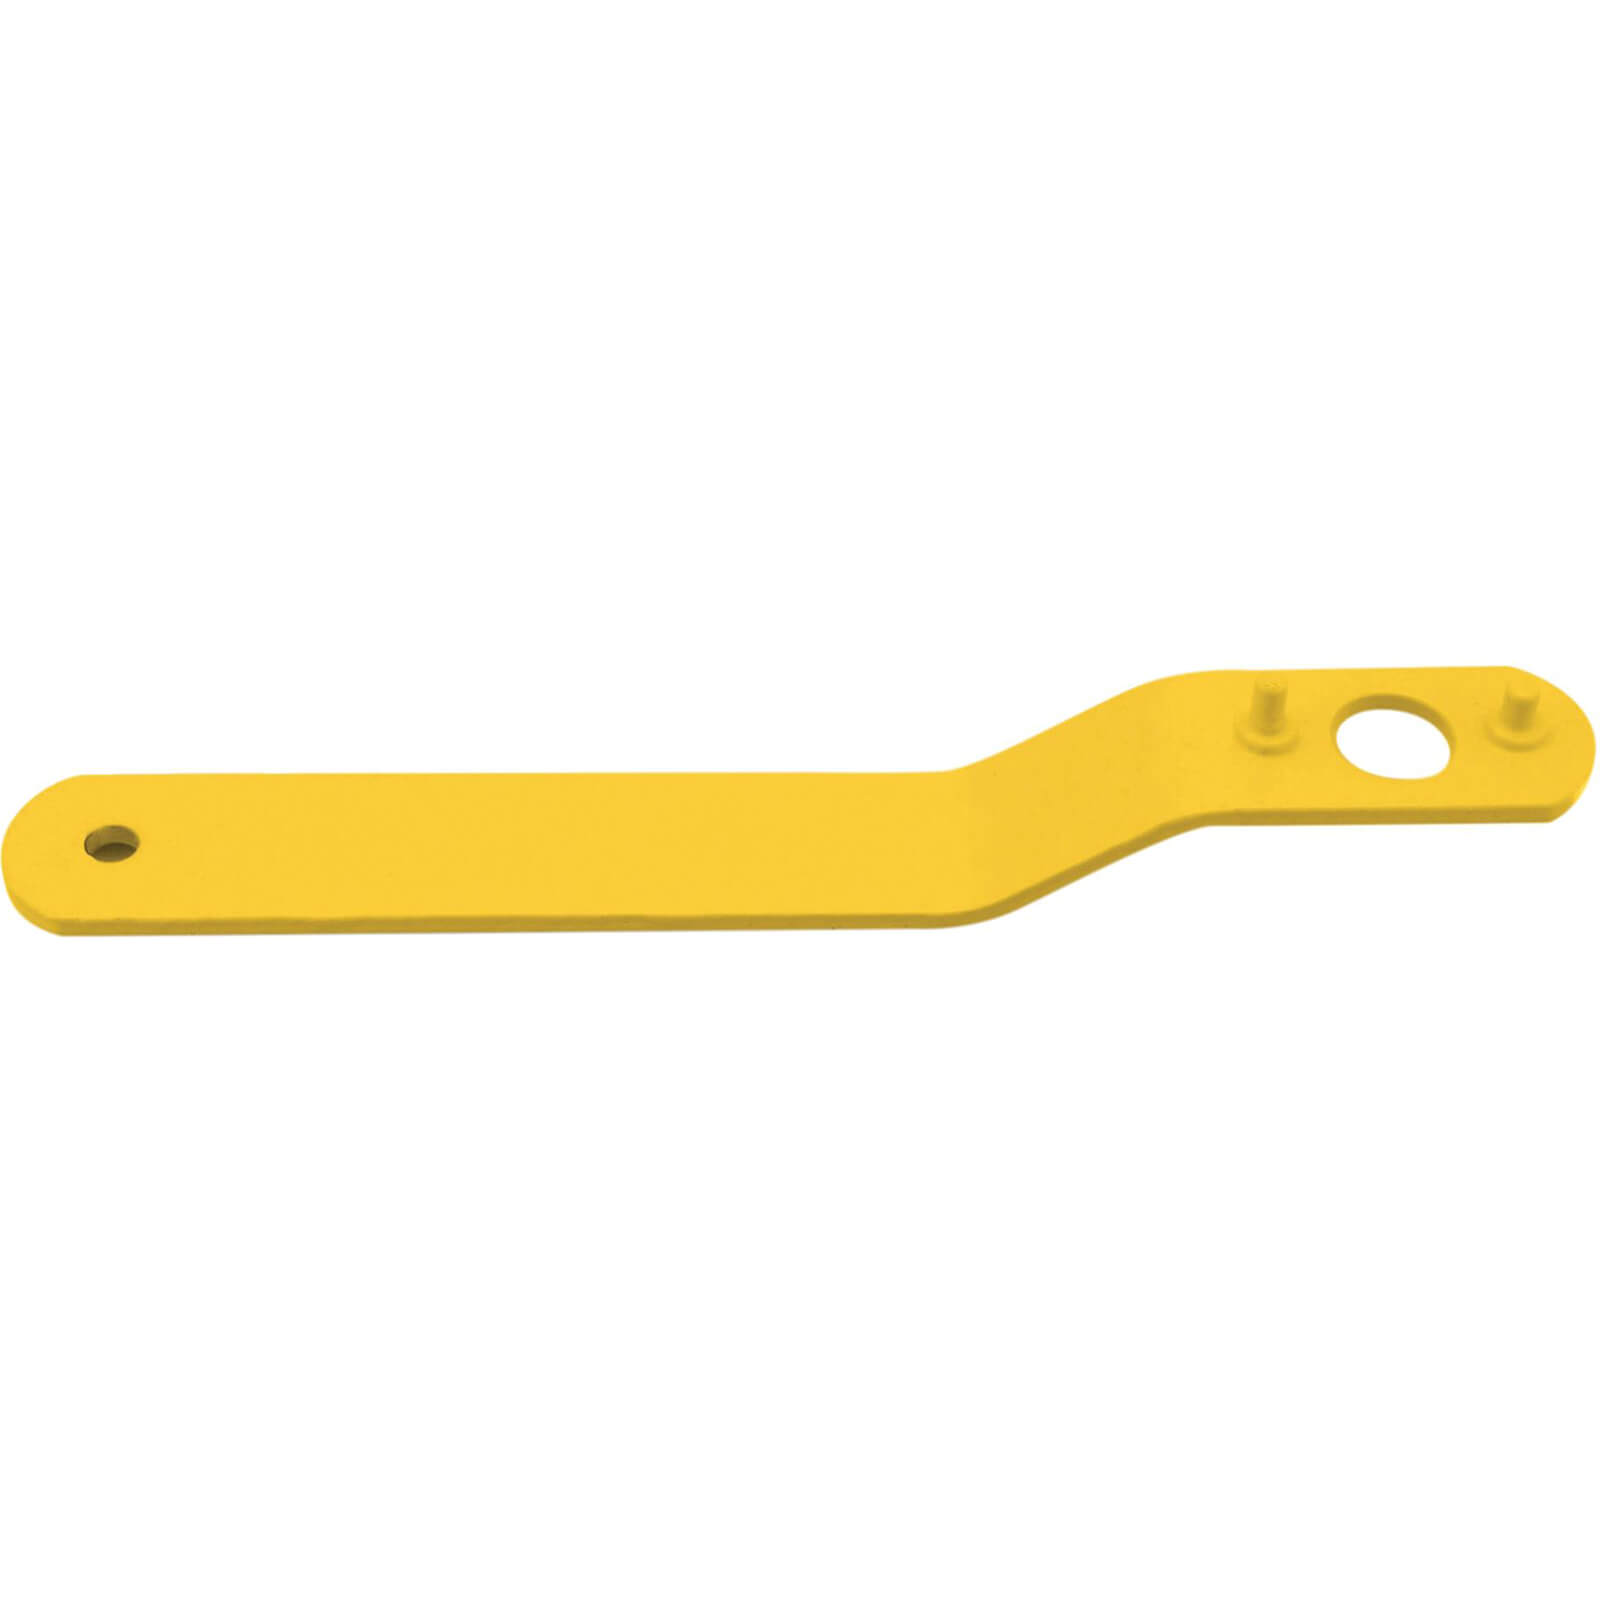 Photos - Wrench Flexipads 28-4 Yellow Angle Grinder Pin Spanner 24030